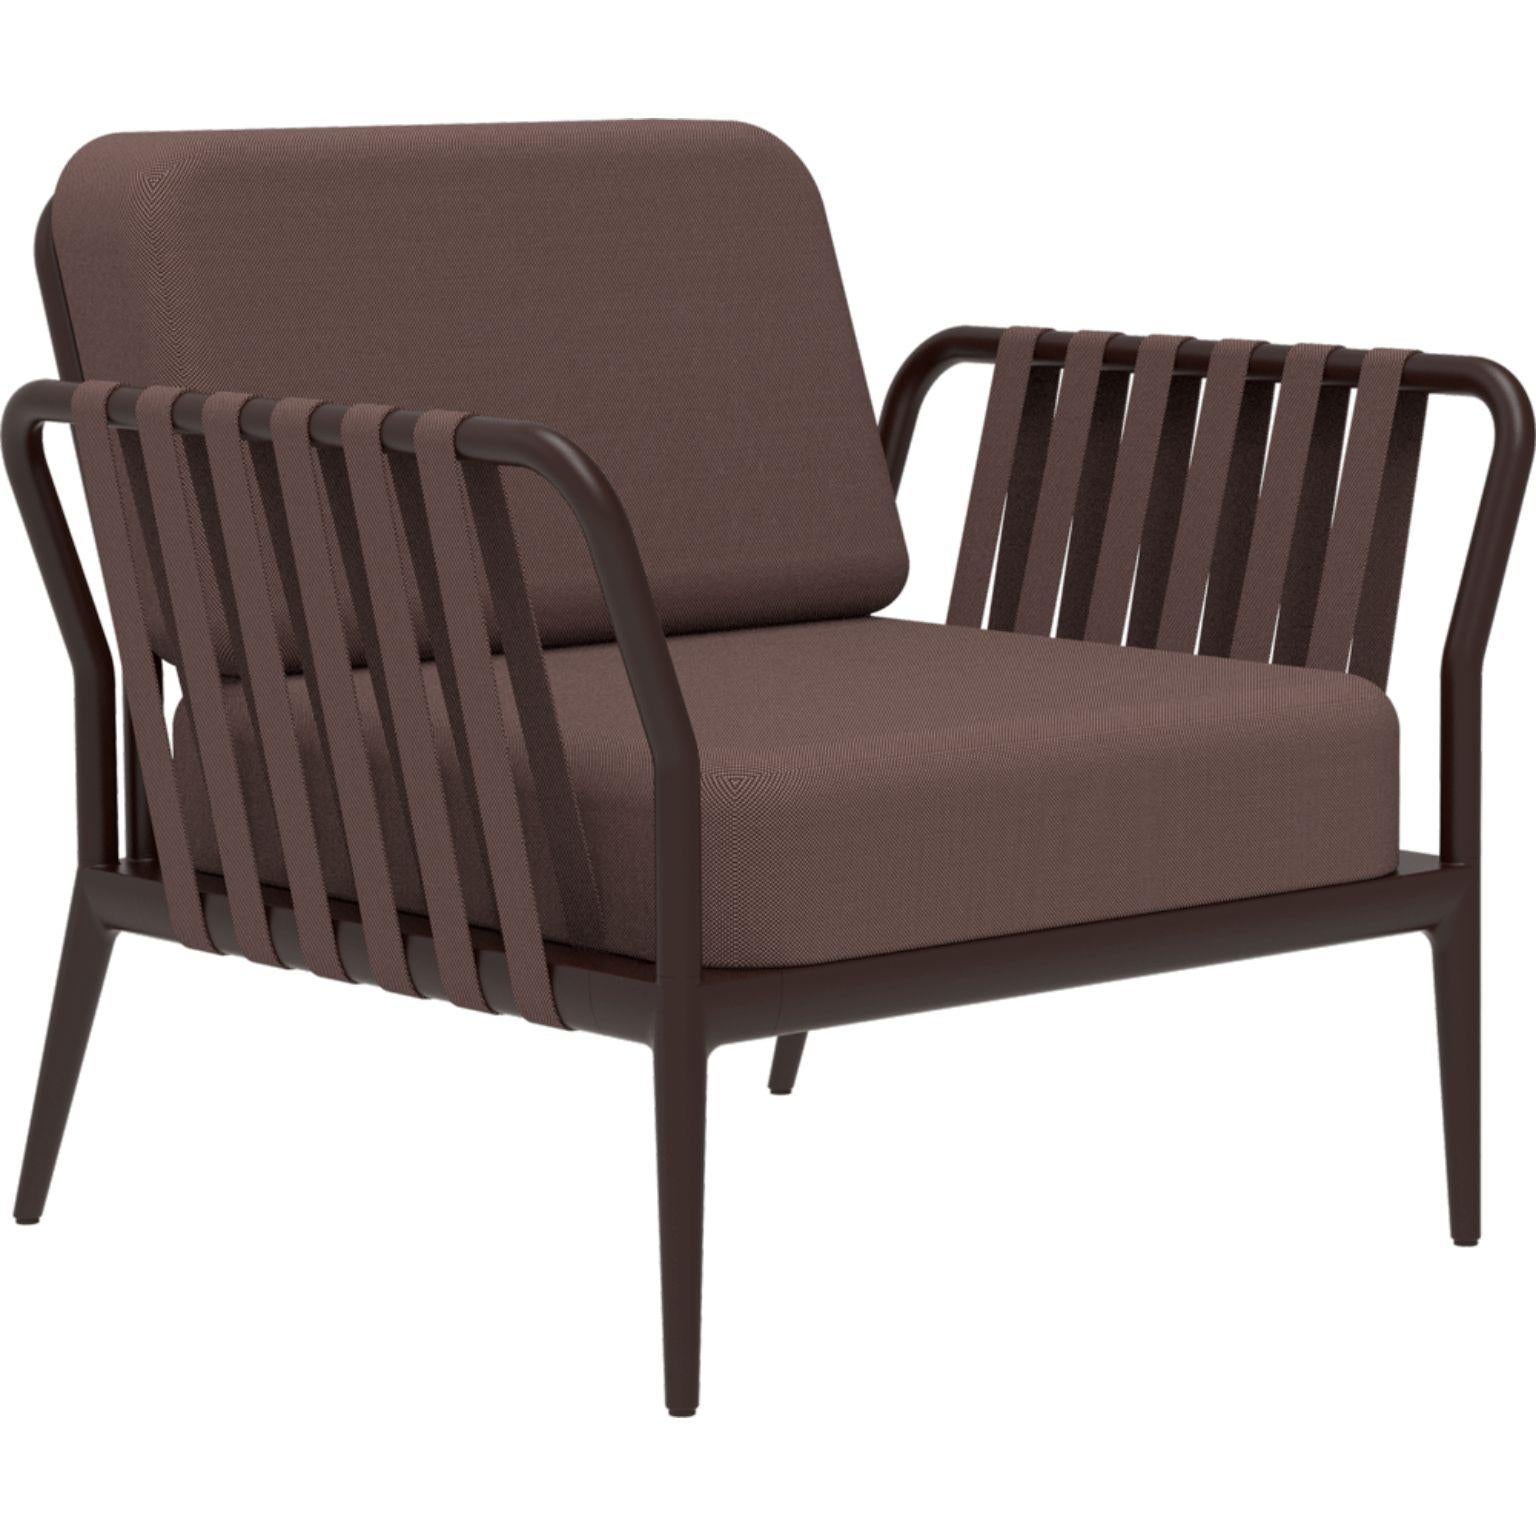 Ribbons chocolate armchair by MOWEE
Dimensions: D83 x W91 x H81 cm (Seat Height 42 cm)
Material: Aluminum, Upholstery
Weight: 20 kg
Also Available in different colors and finishes. 

An unmistakable collection for its beauty and robustness. A